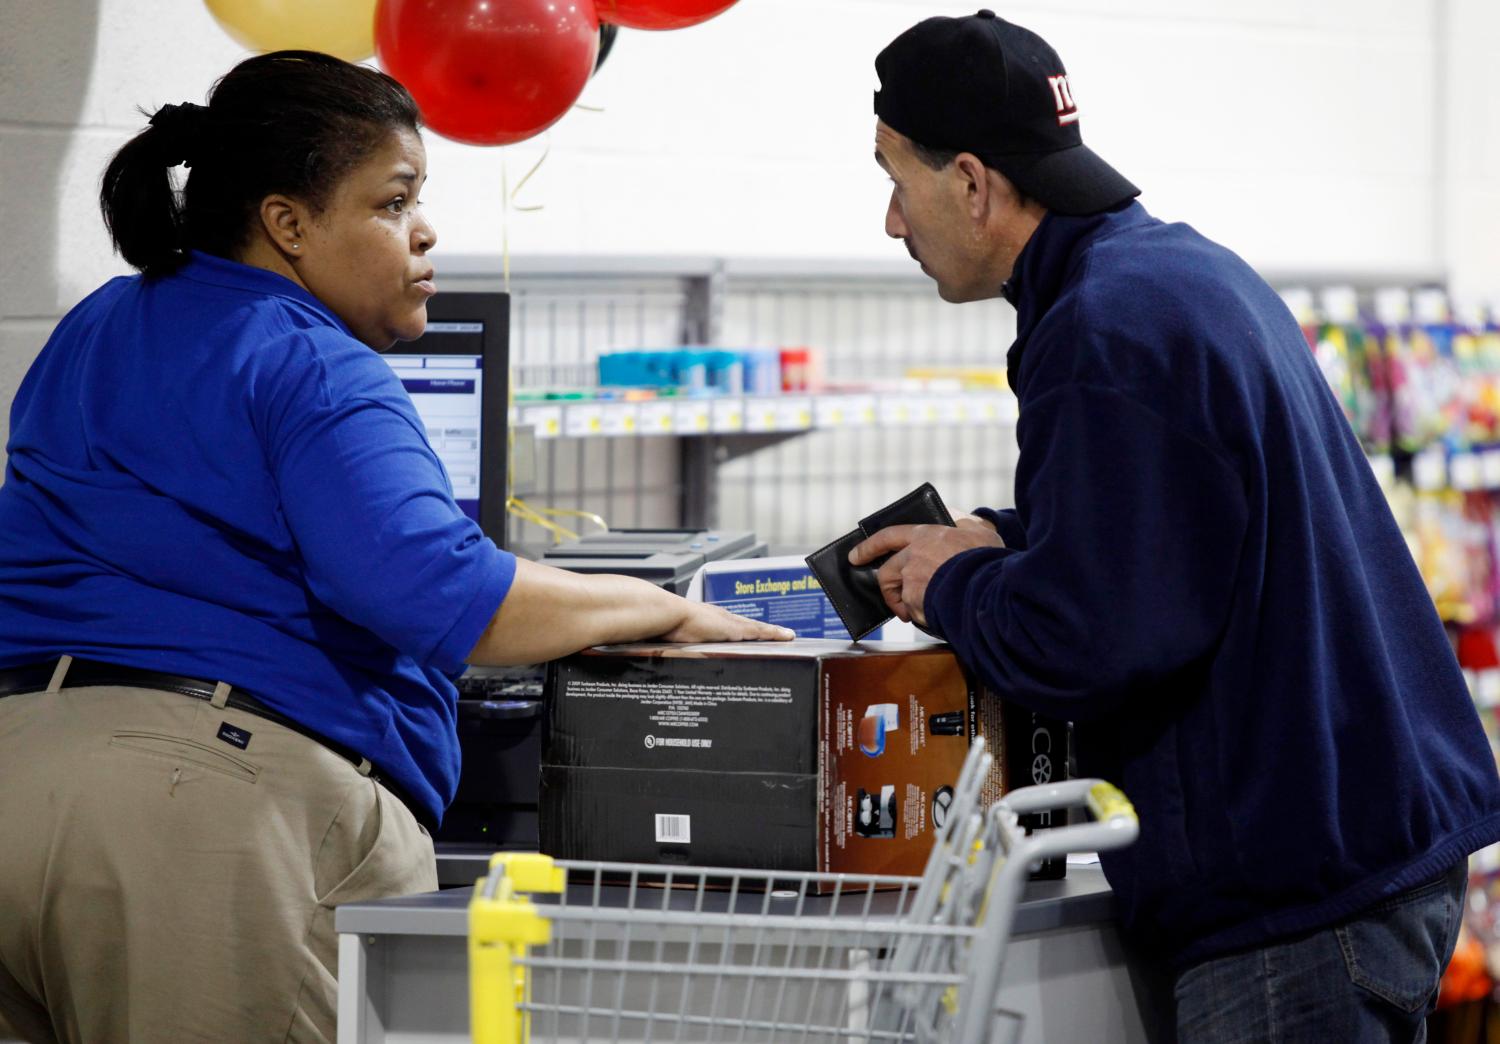 A man leans in to speak to a cashier while checking out at a Best Buy store in Flushing